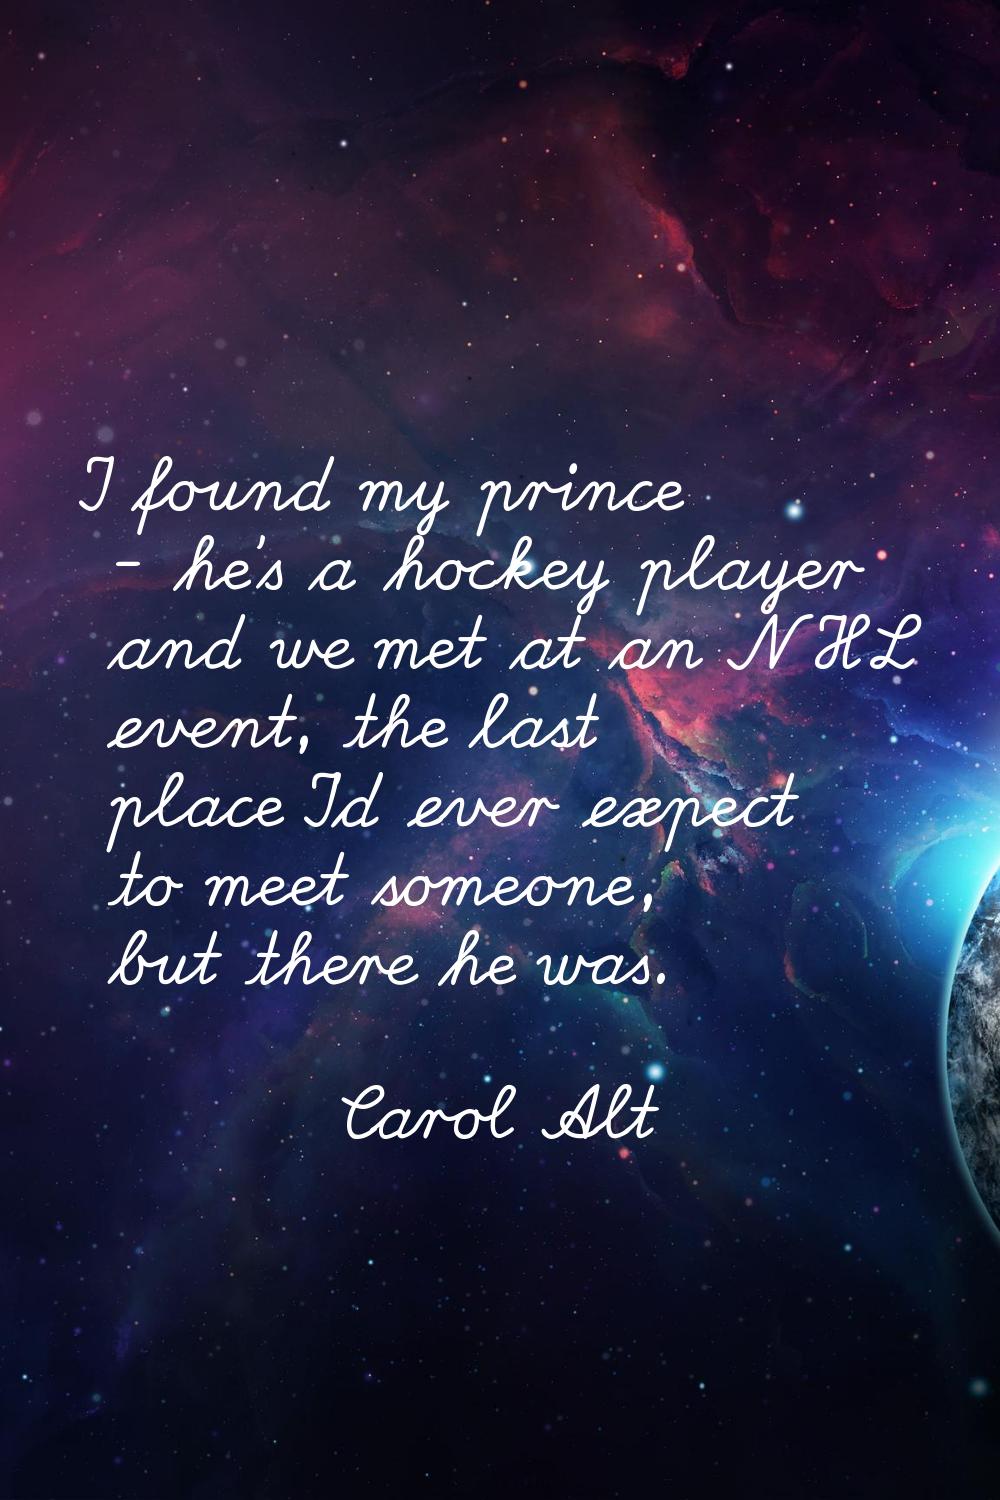 I found my prince - he's a hockey player and we met at an NHL event, the last place I'd ever expect